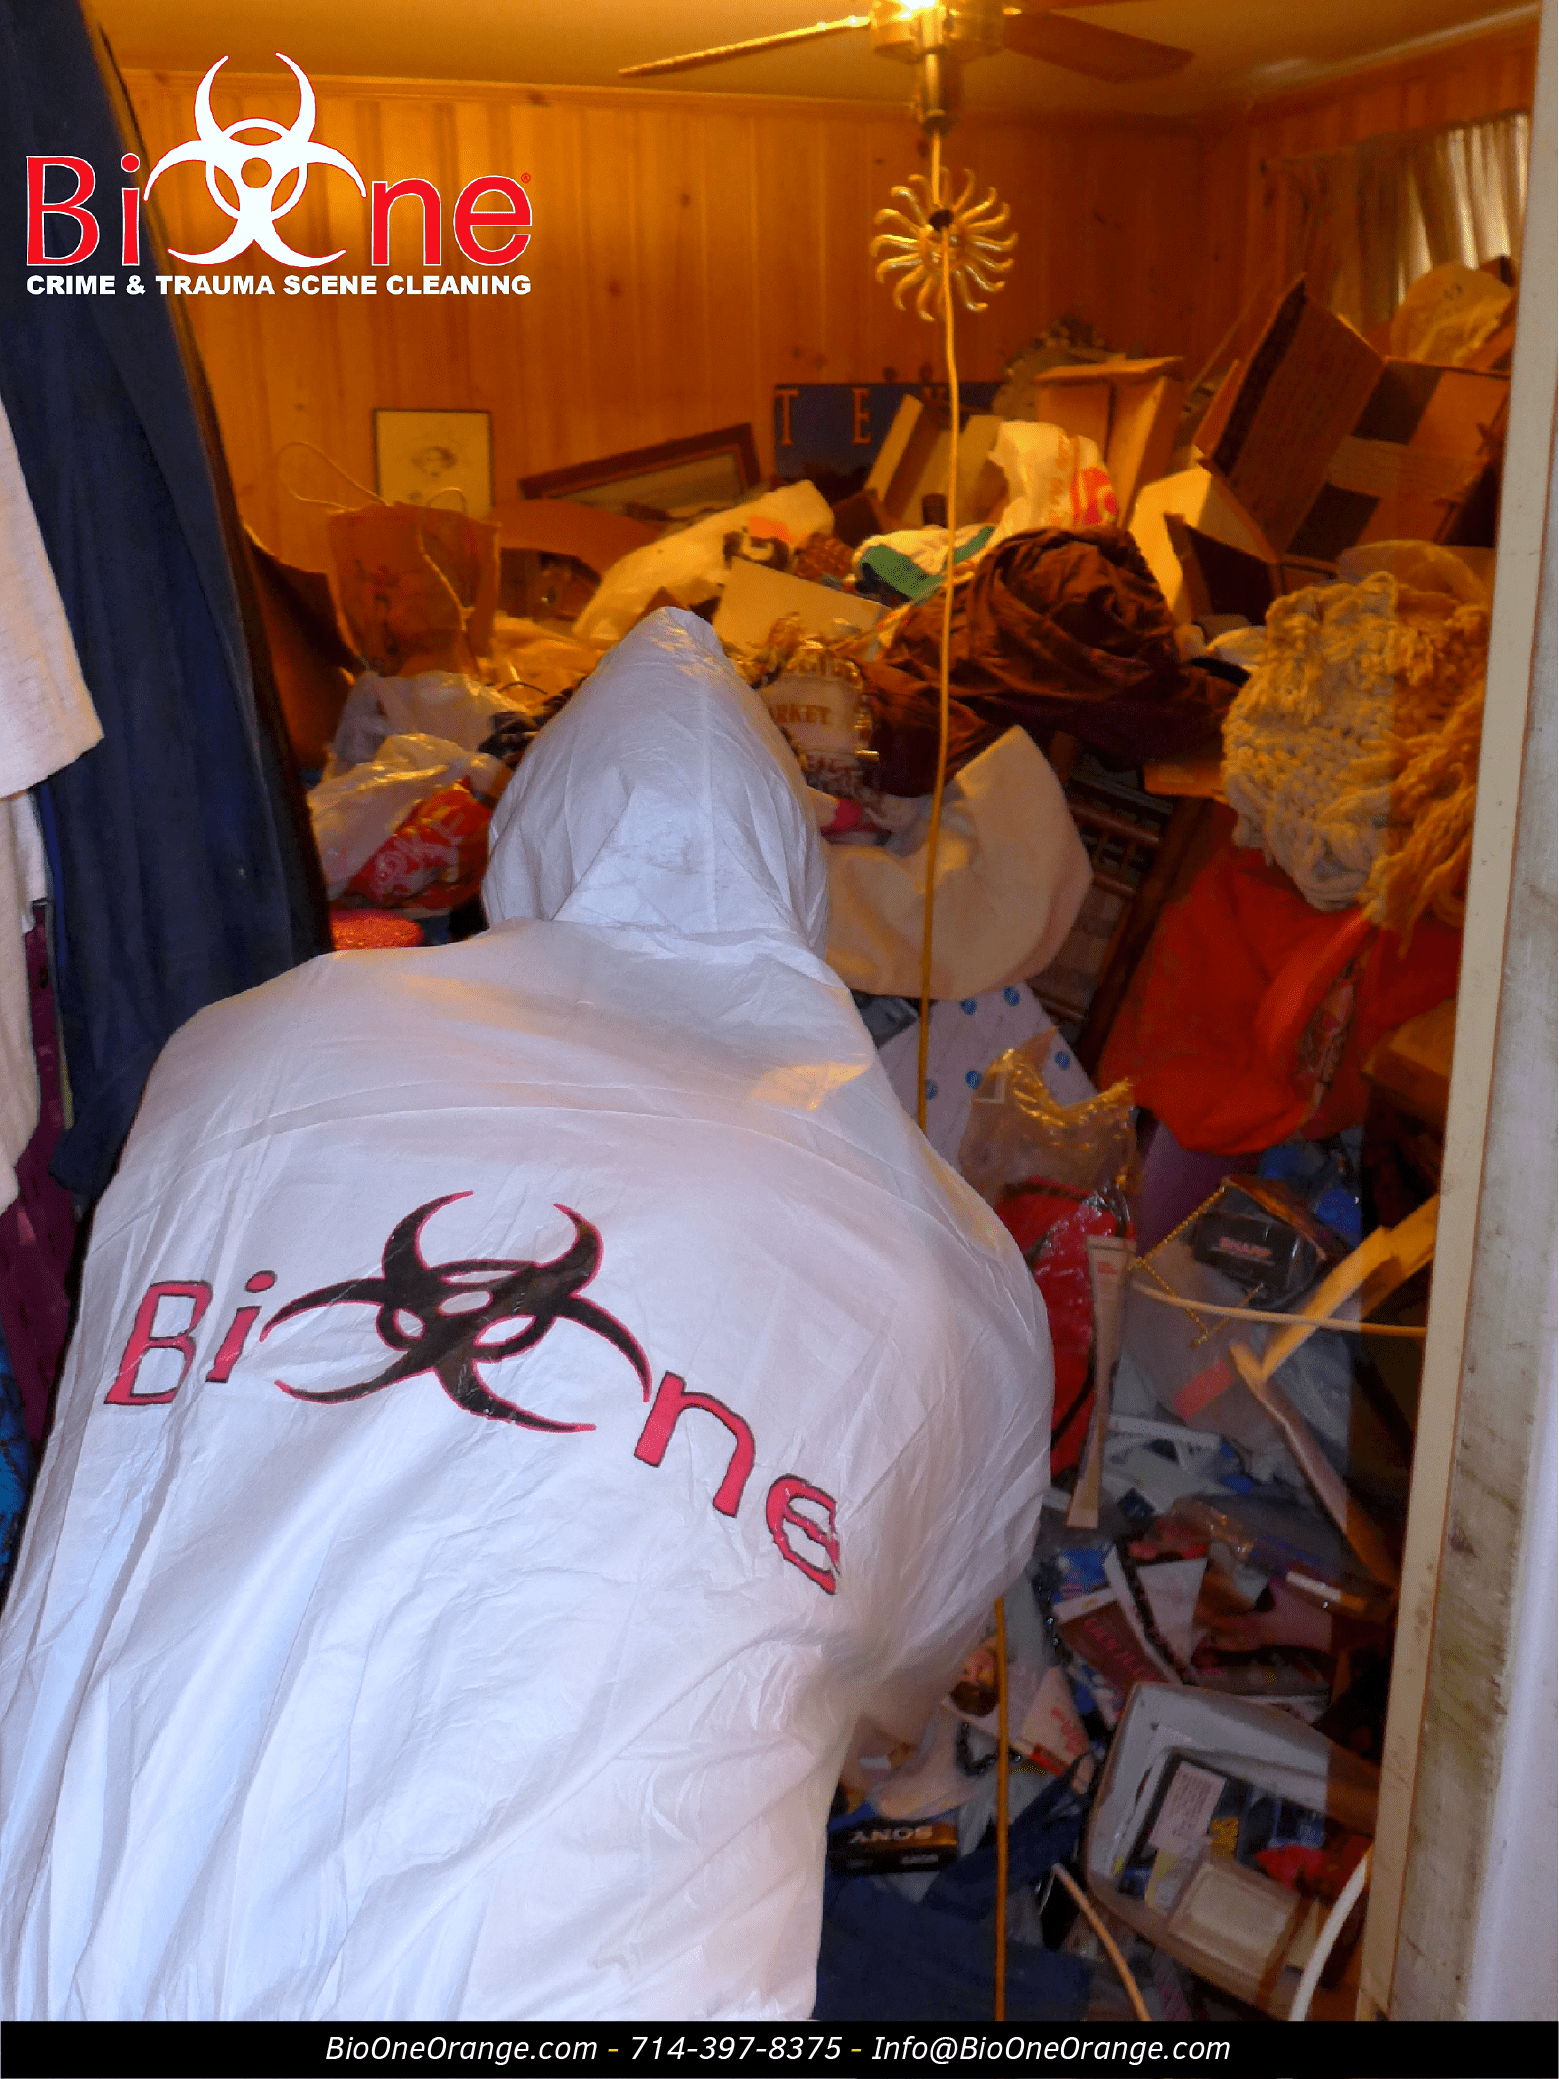 Image shows Bio-One technician entering a cluttered house.